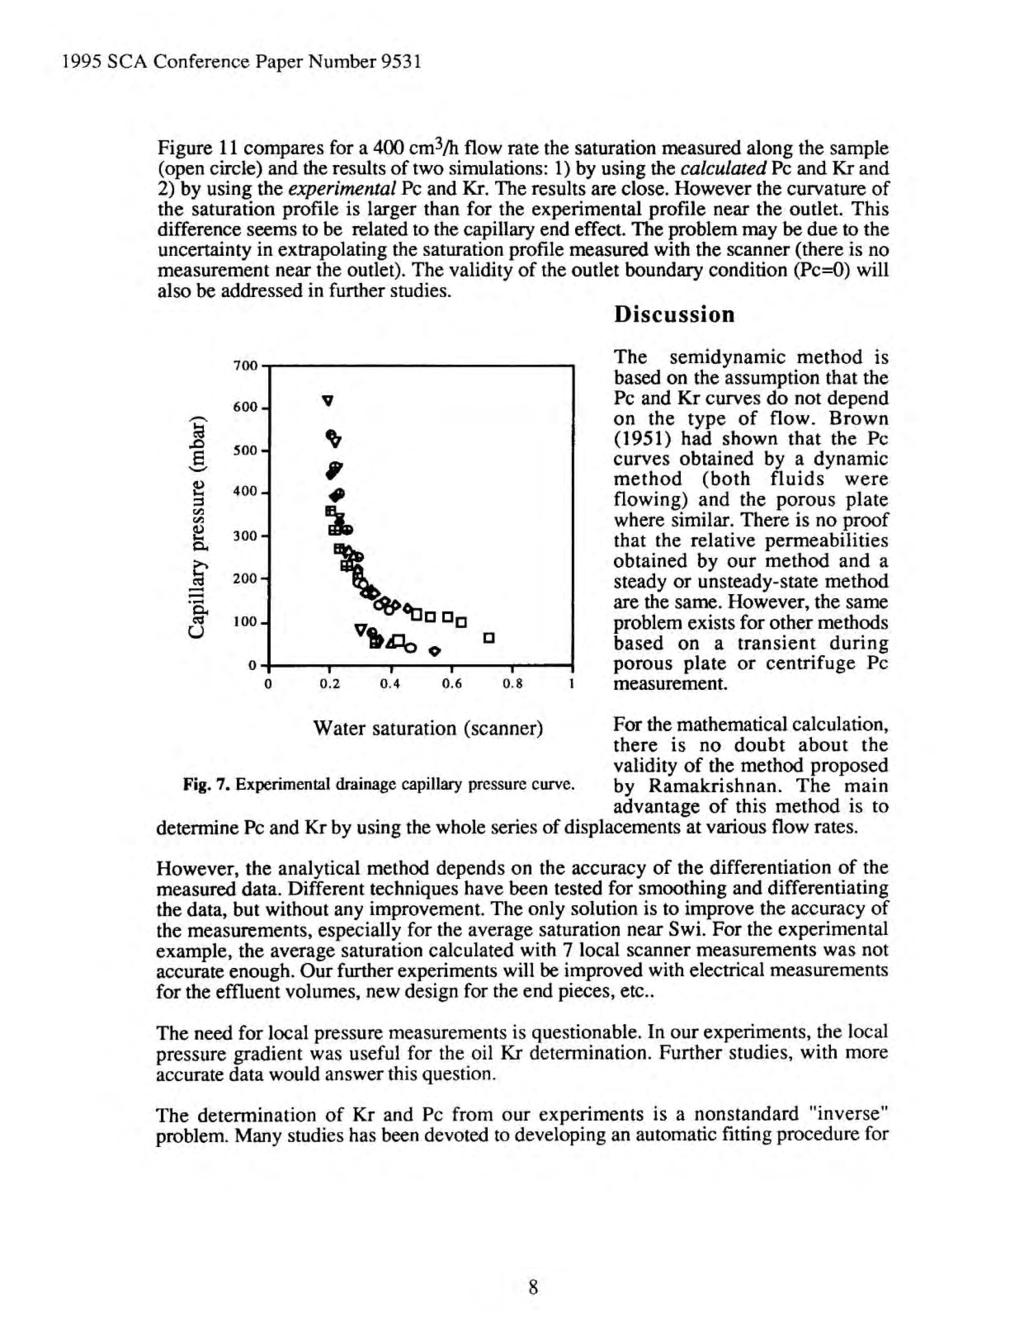 1995 SCA Conference Paper Number 953 1 Figure 11 compares for a 400 cm3/h flow rate the saturation measured along the sample (open circle) and the results of two simulations: 1) by using the